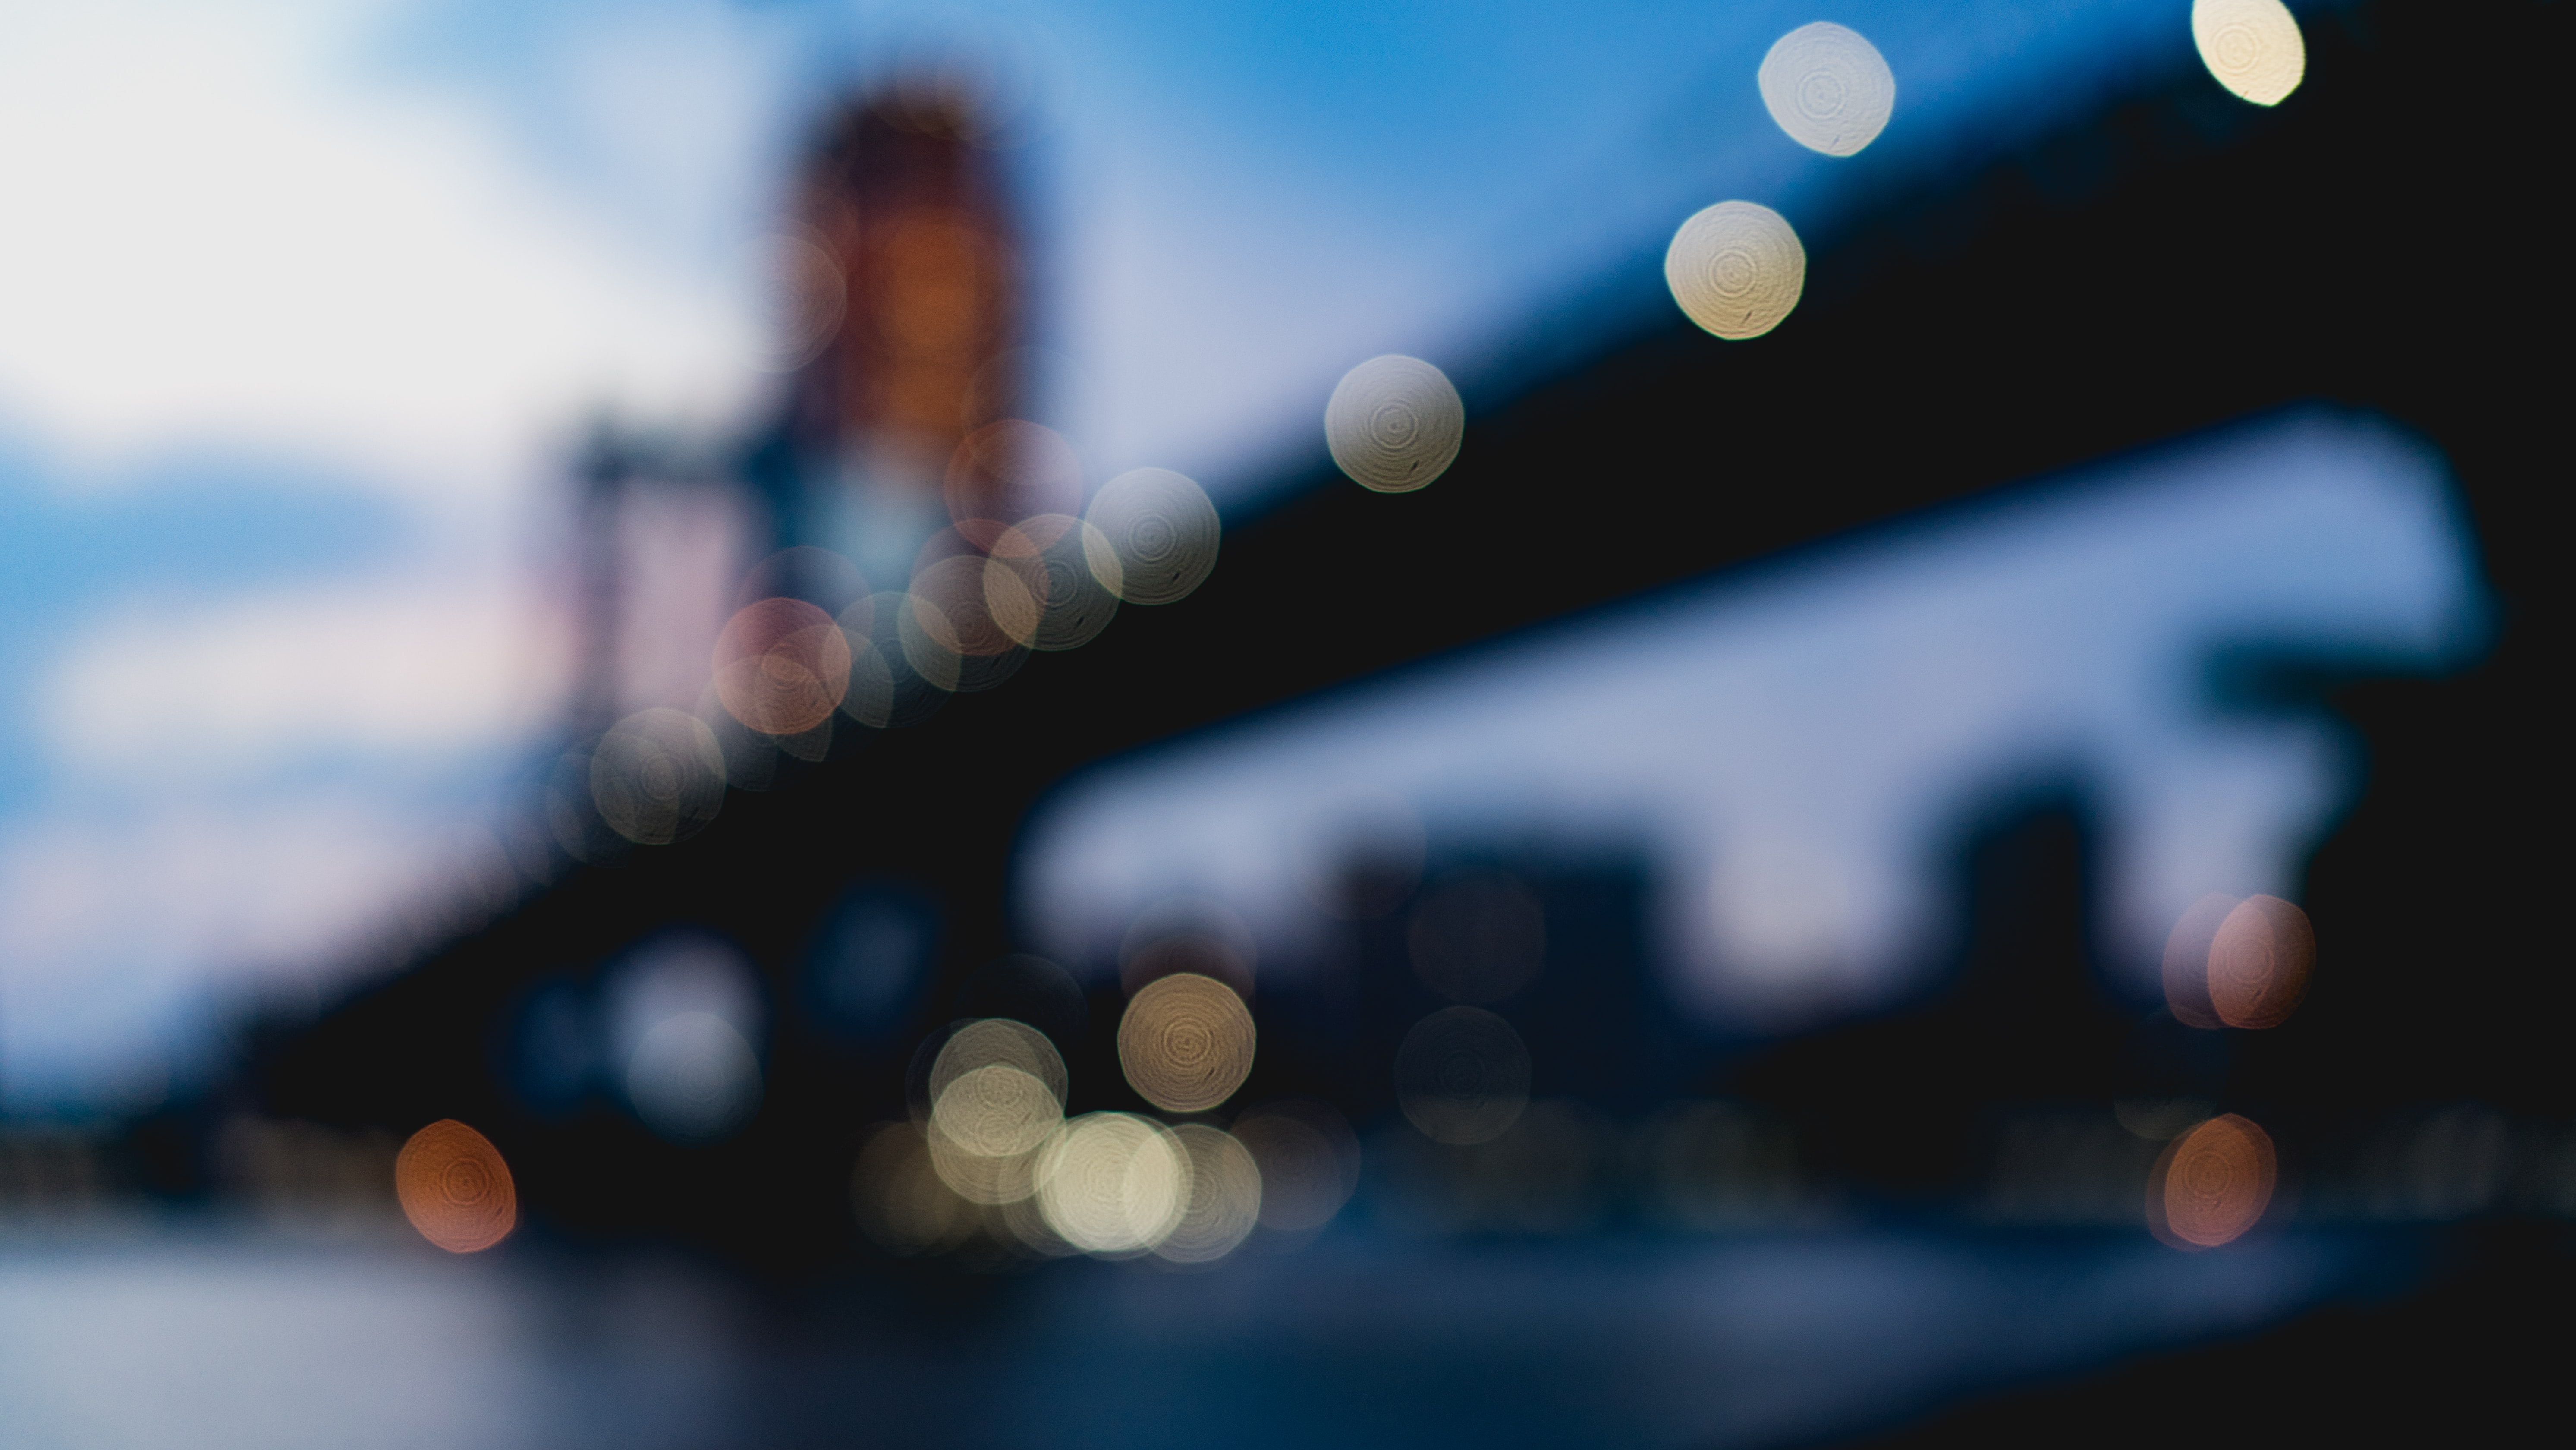 blurred city lights with bridge in background